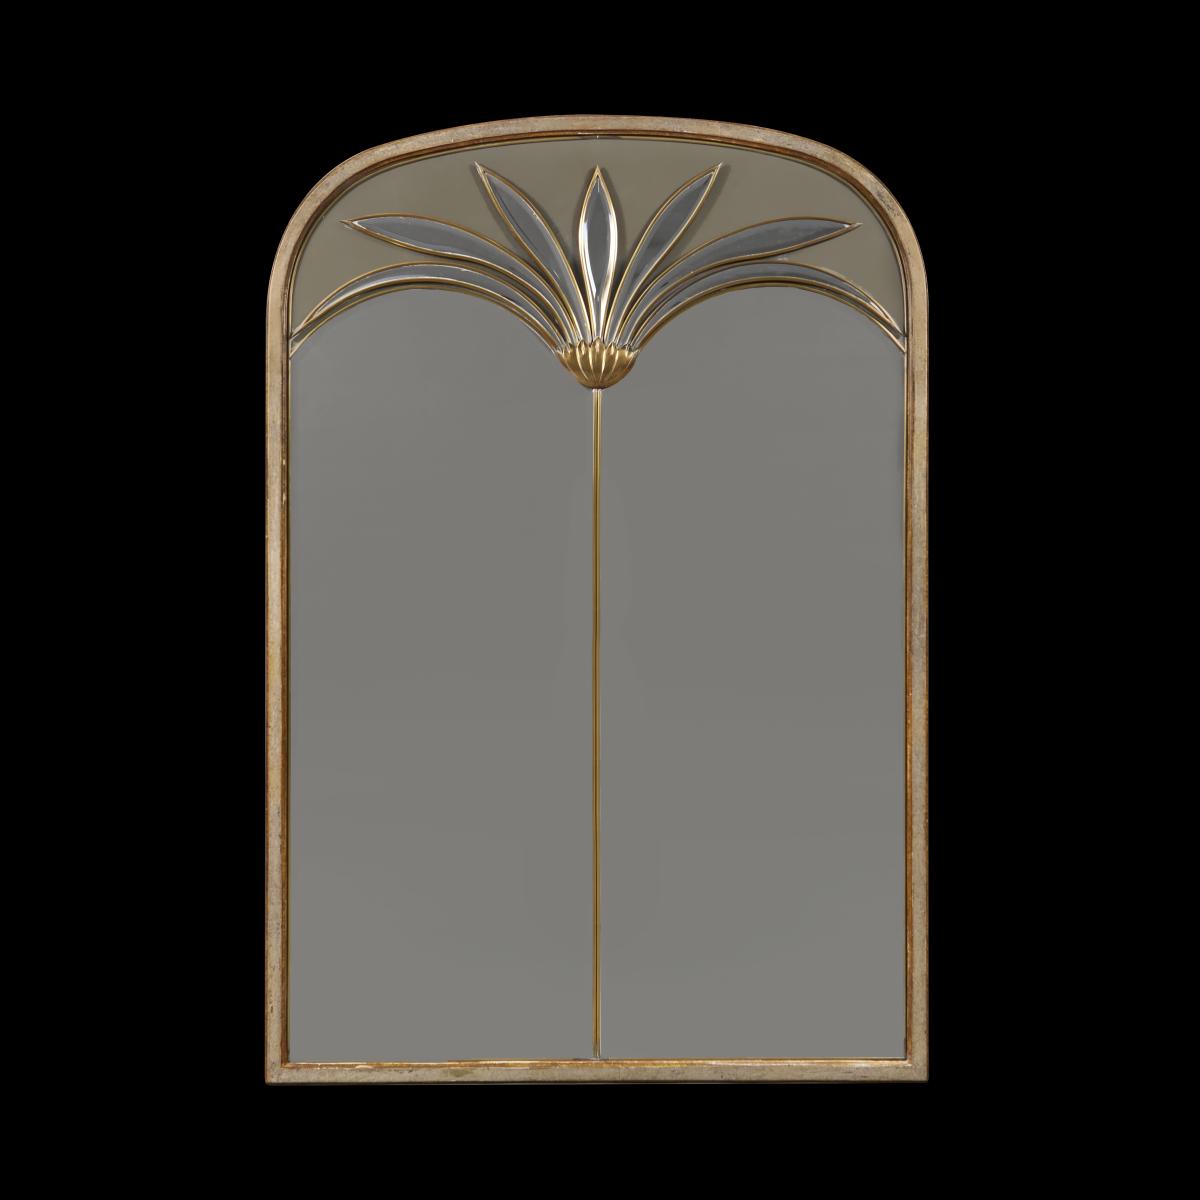 Palm Fronds Mirror by Vivai Del Sud